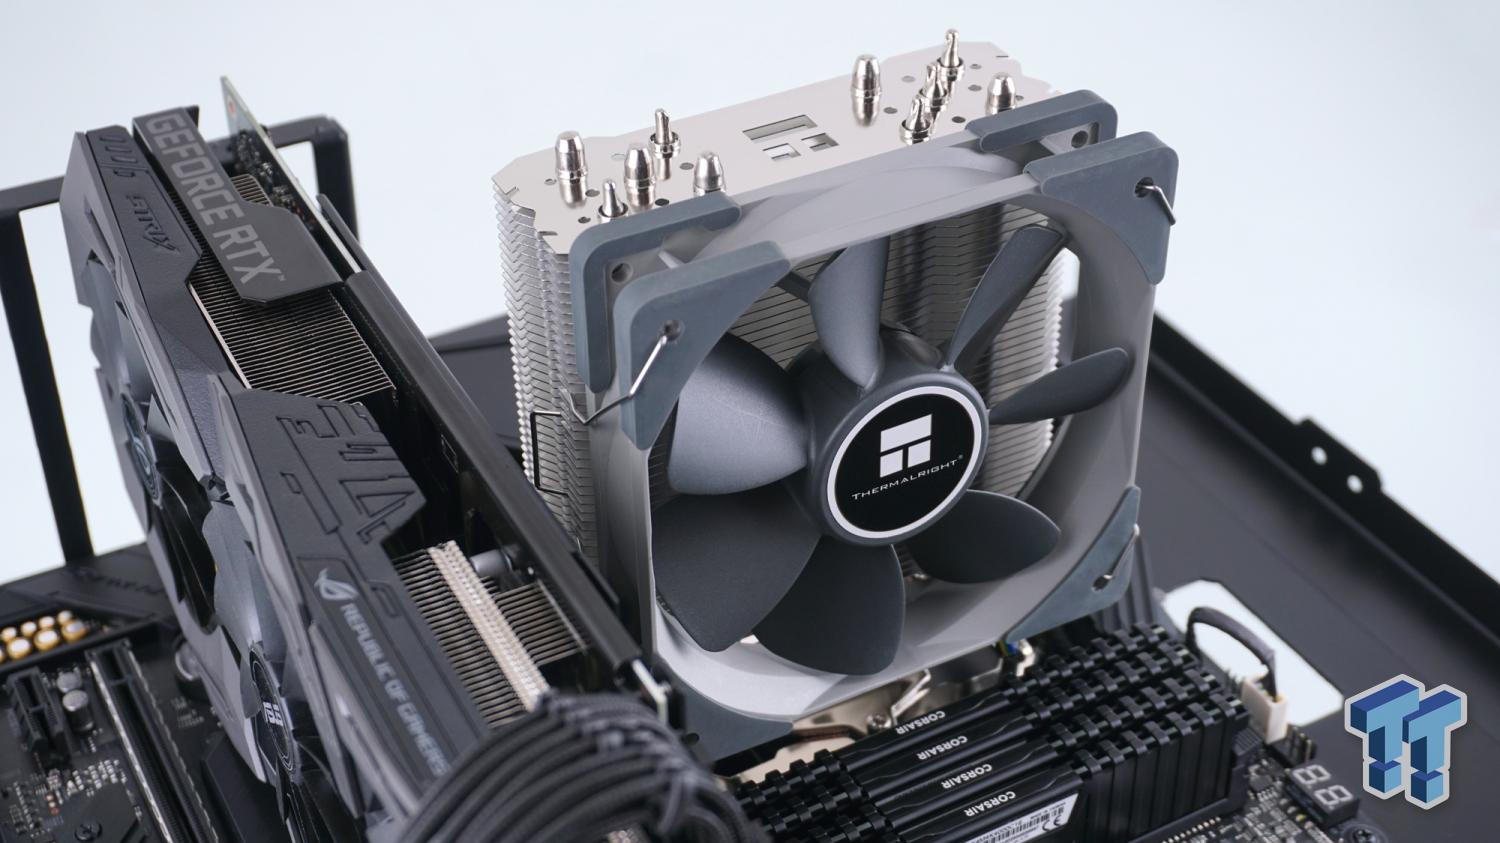 The ThermalRight Assassin X 120 R SE White - CPU Cooler Review 